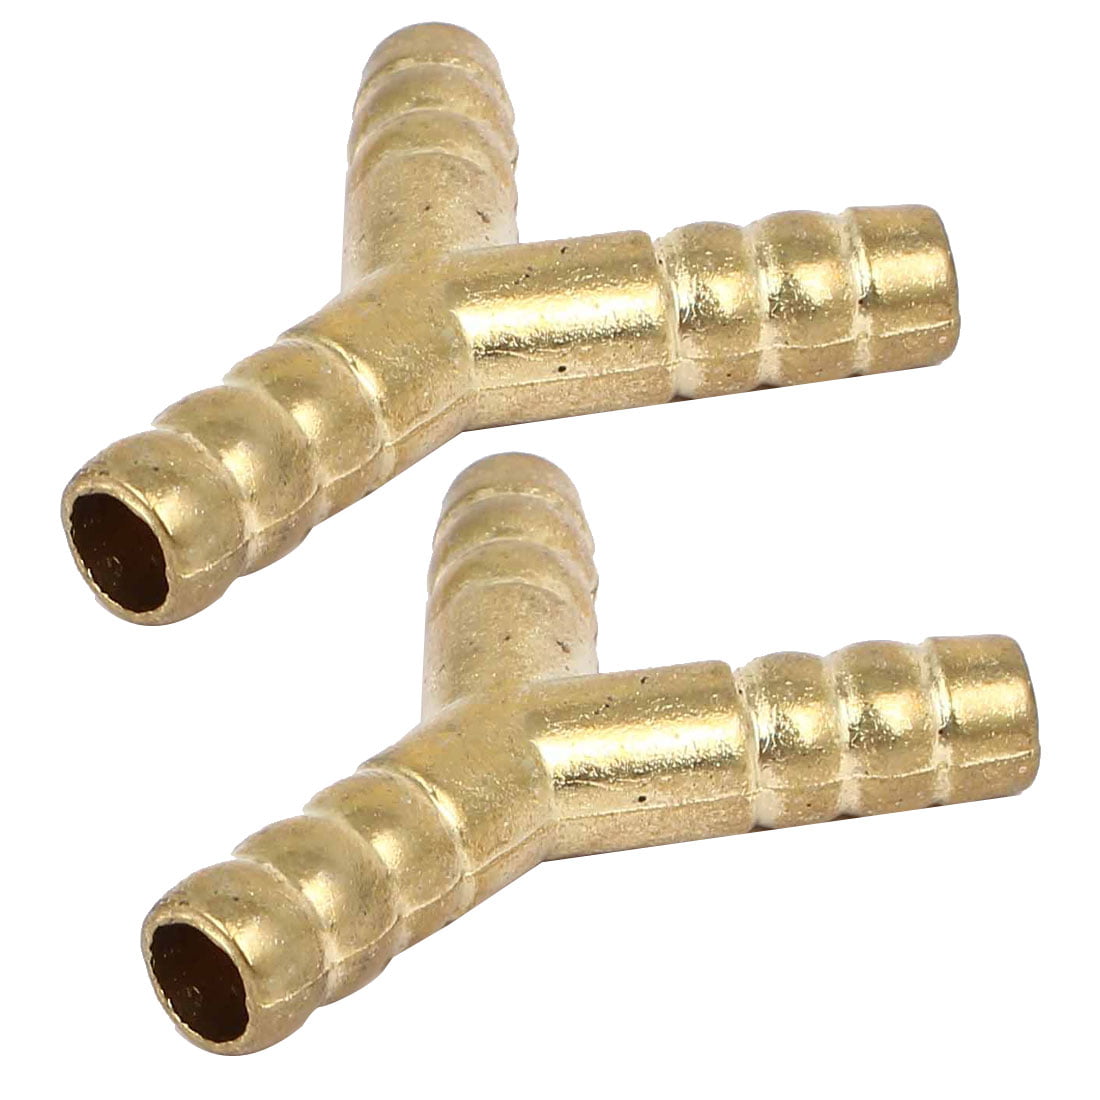 2x 12mm 90 Right Angle Hose Tupe Pipe Connectors Tube Pipe Connector Joiner Air Fuel Water FREE FIRST CLASS UK POSTAGE! 